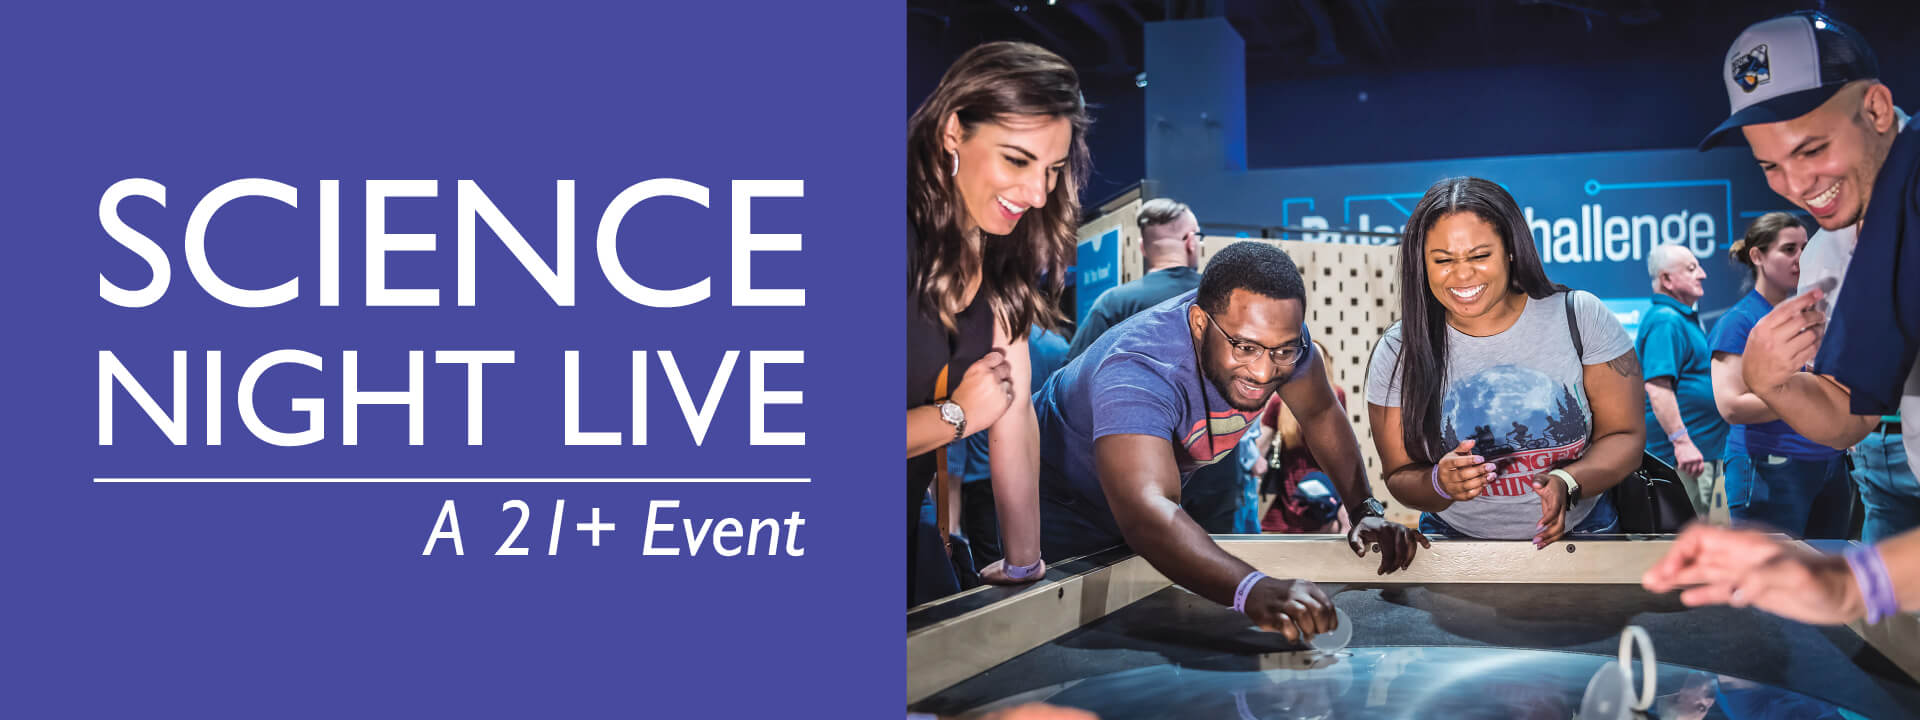 Science Night Live - A 21+ Event Logo and photo of guests enjoying an exhibit at event.